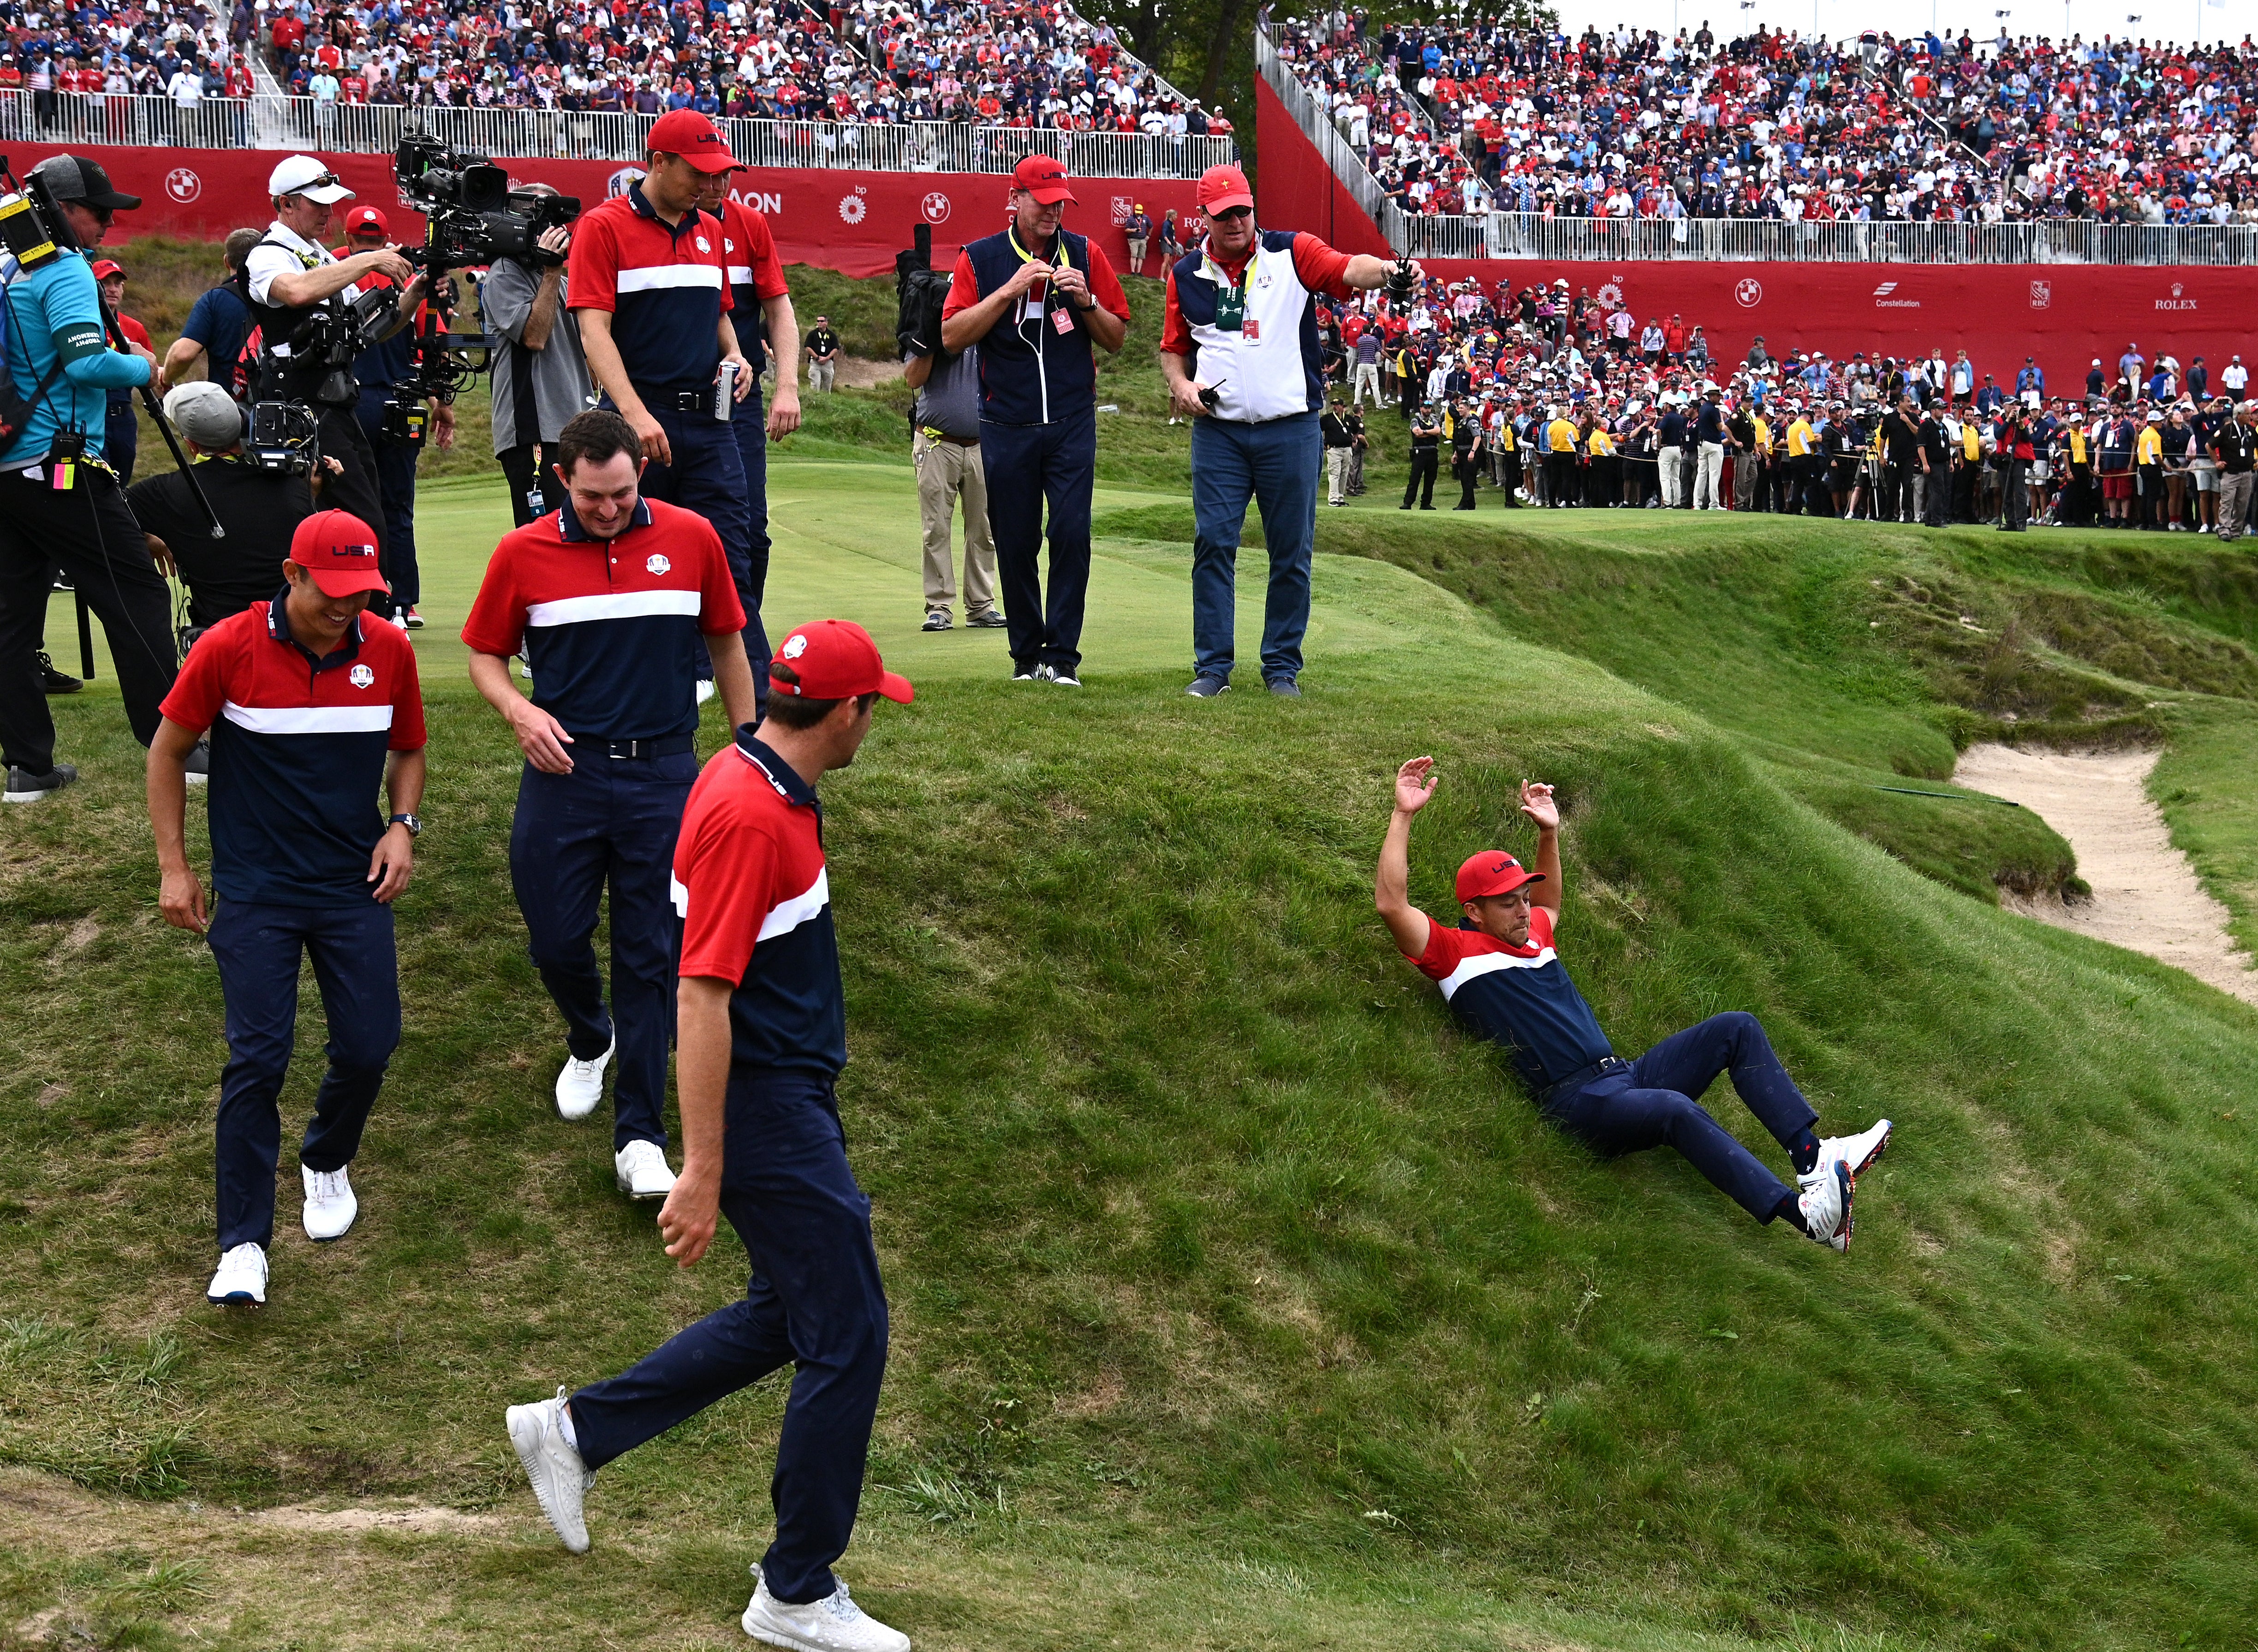 A jubilant Xander Schauffele slides down an embankment hill on his way to the podium after Team USA’s Ryder Cup win (Anthony Behar/PA)